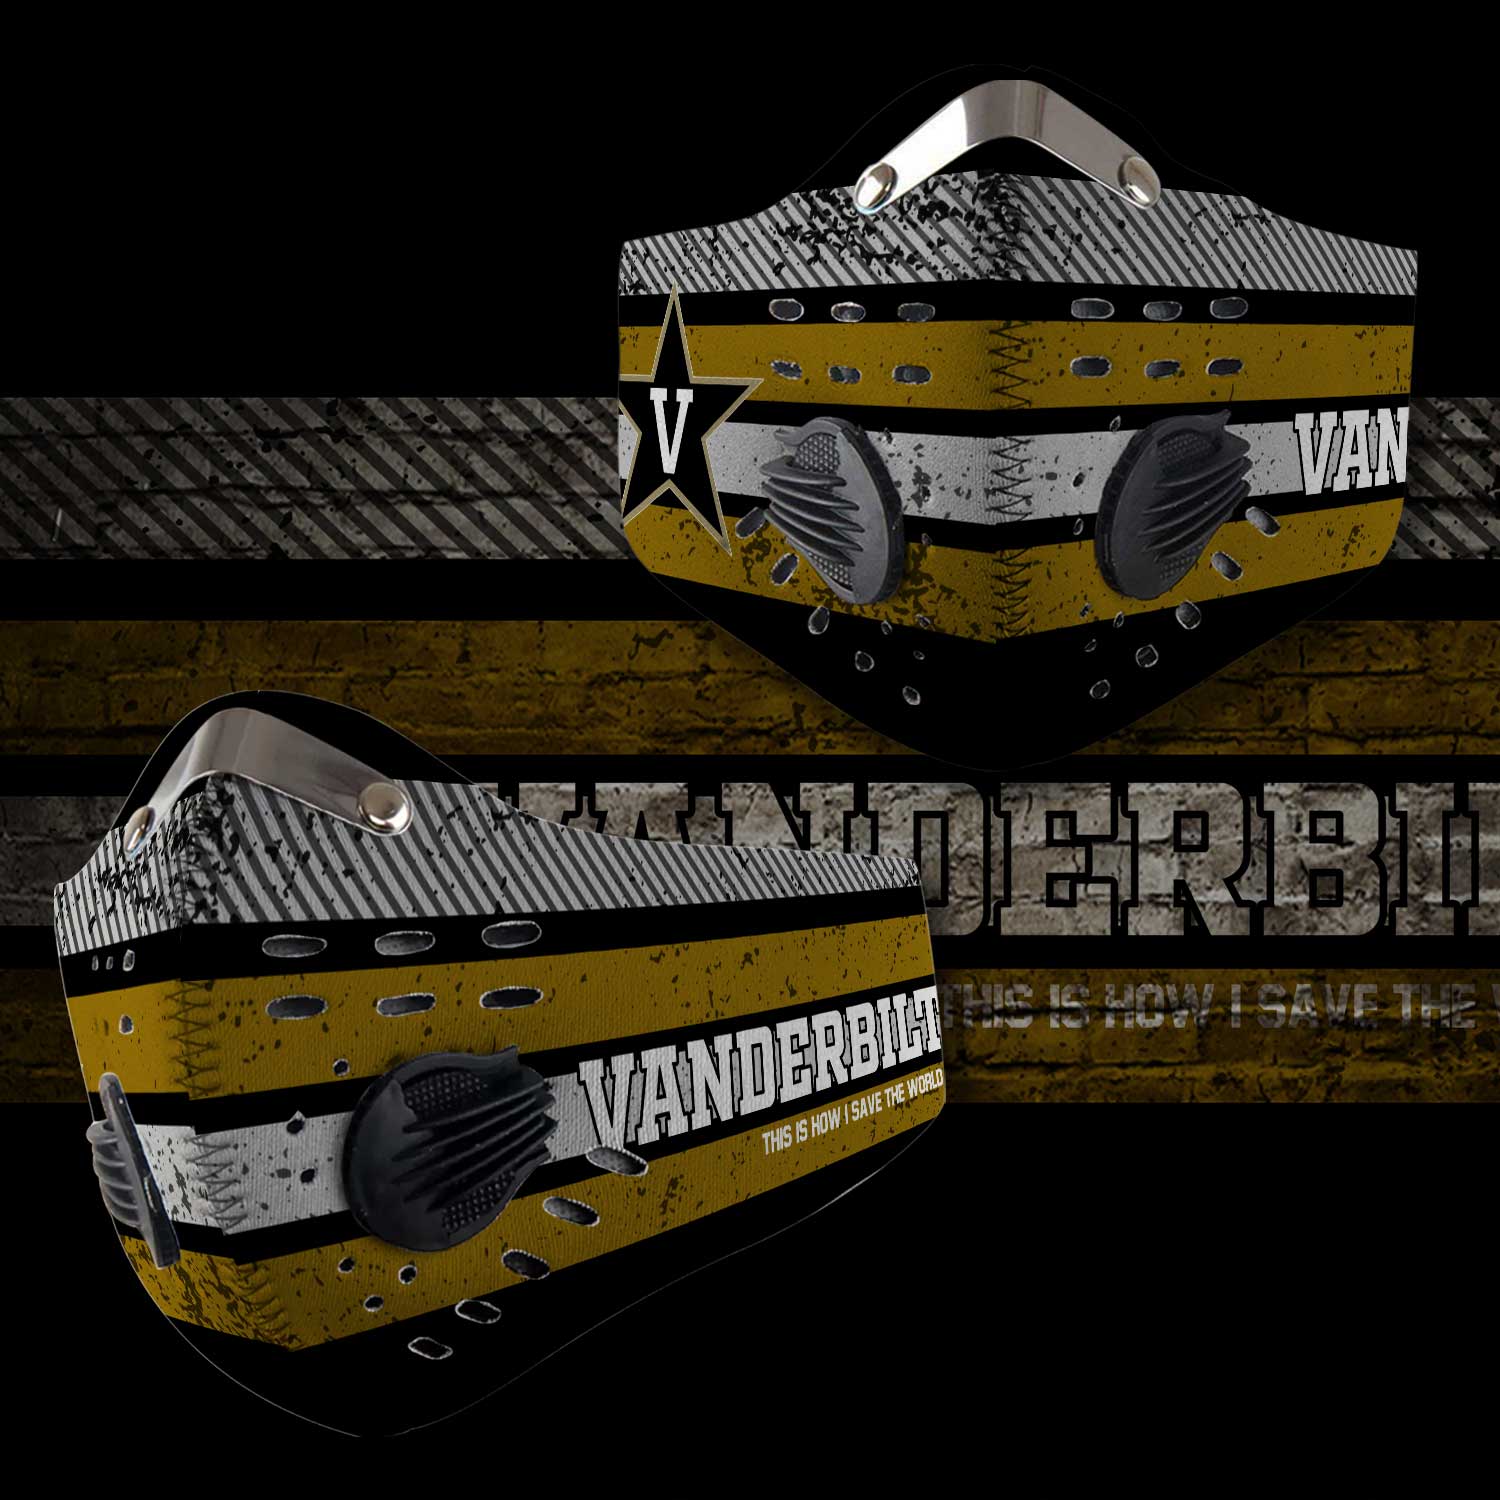 Vanderbilt commodores this is how i save the world carbon filter face mask